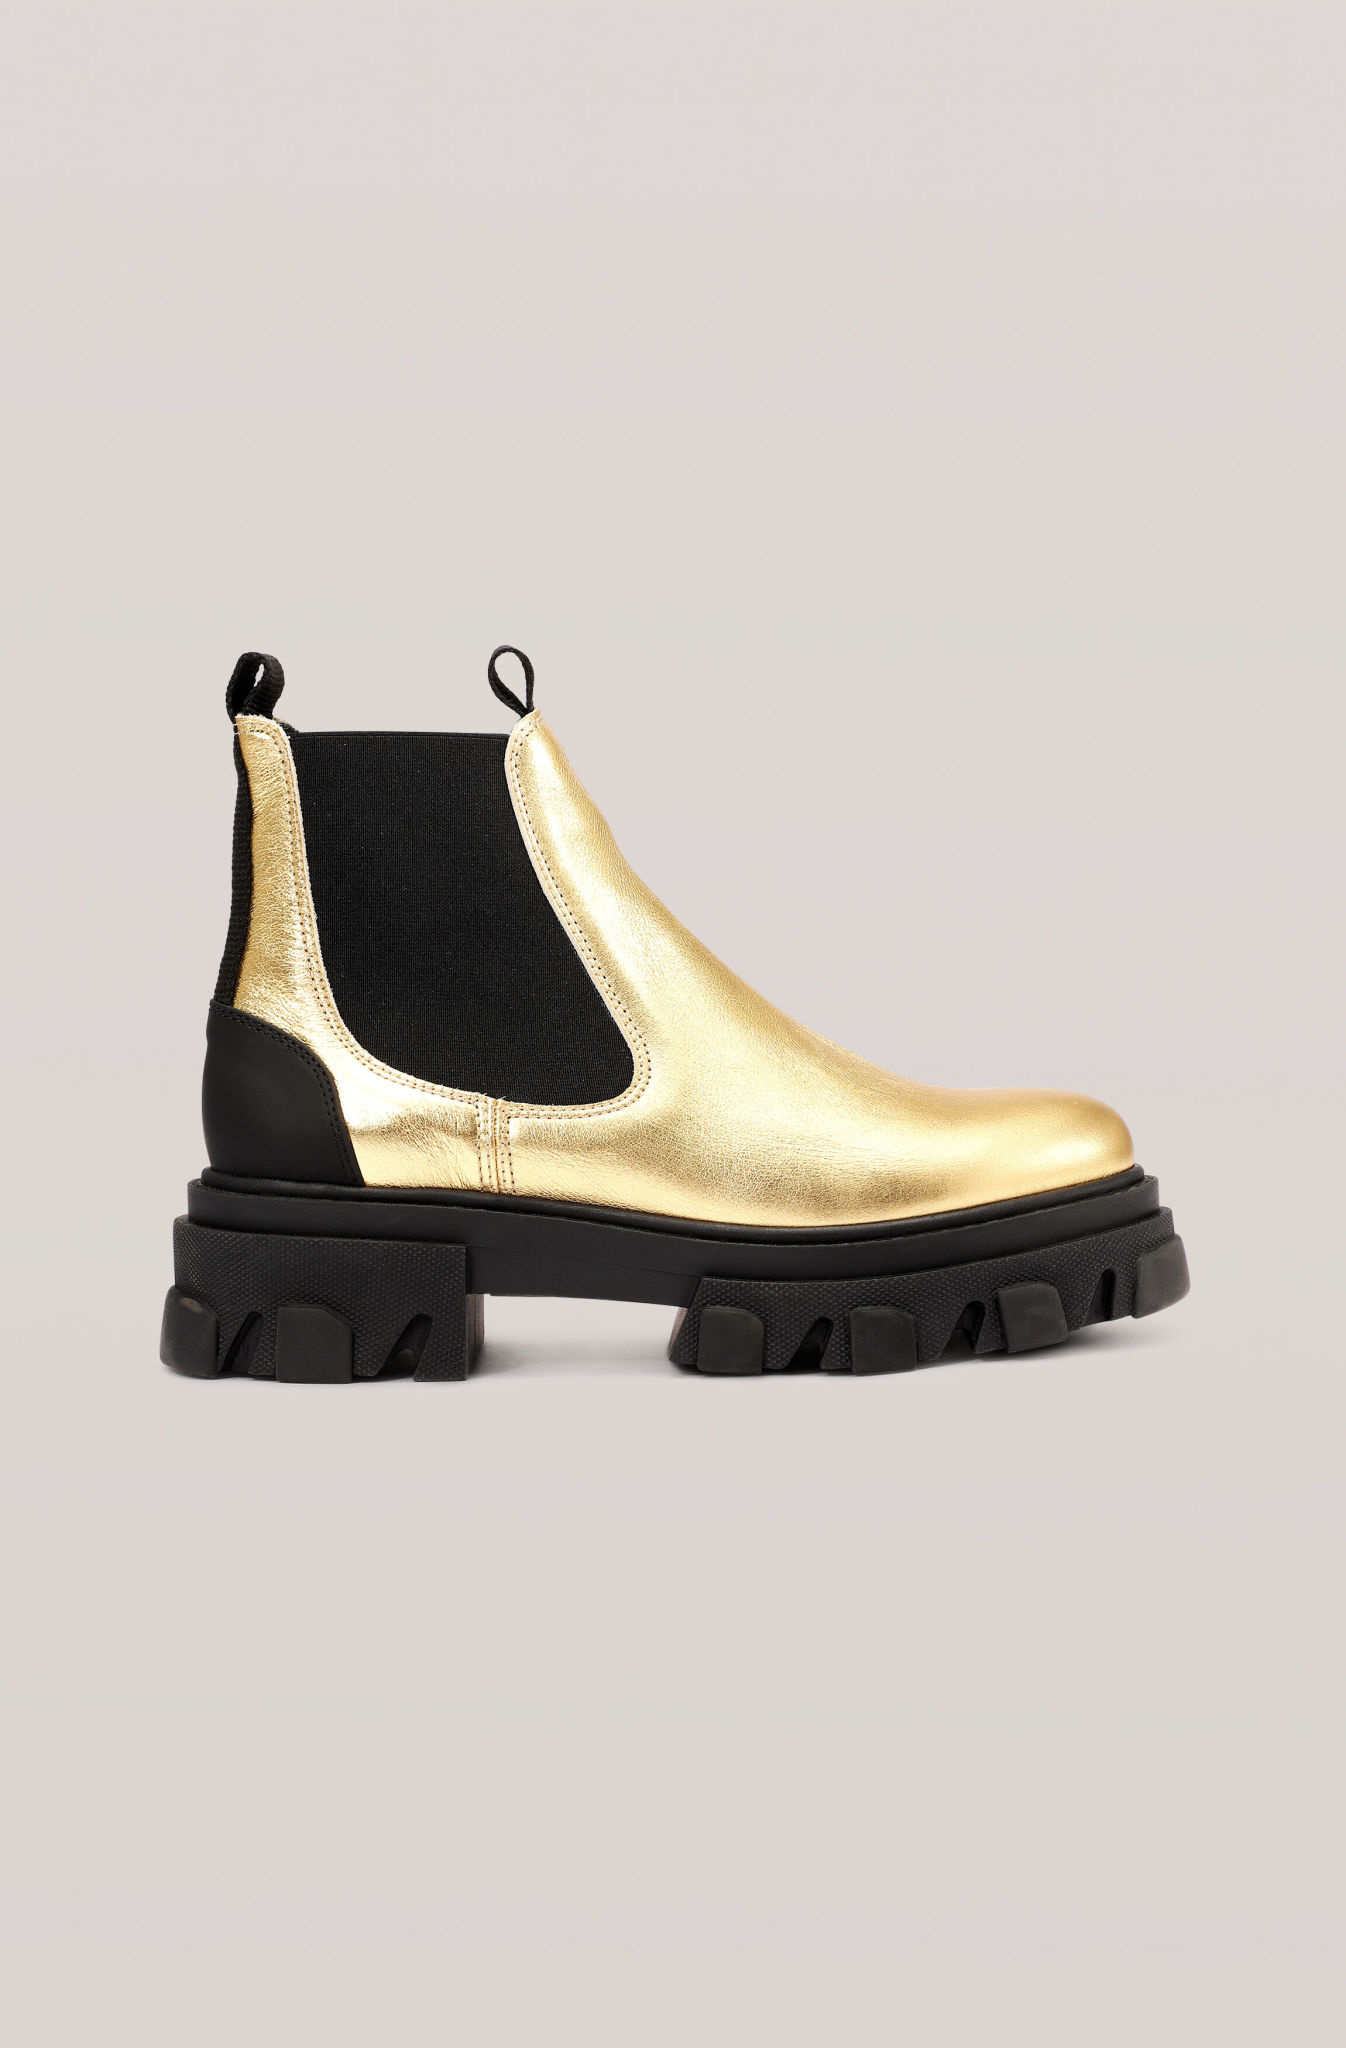 Korridor chance parade GANNI Low Chelsea Boot in Gold - NOW OR NEVER